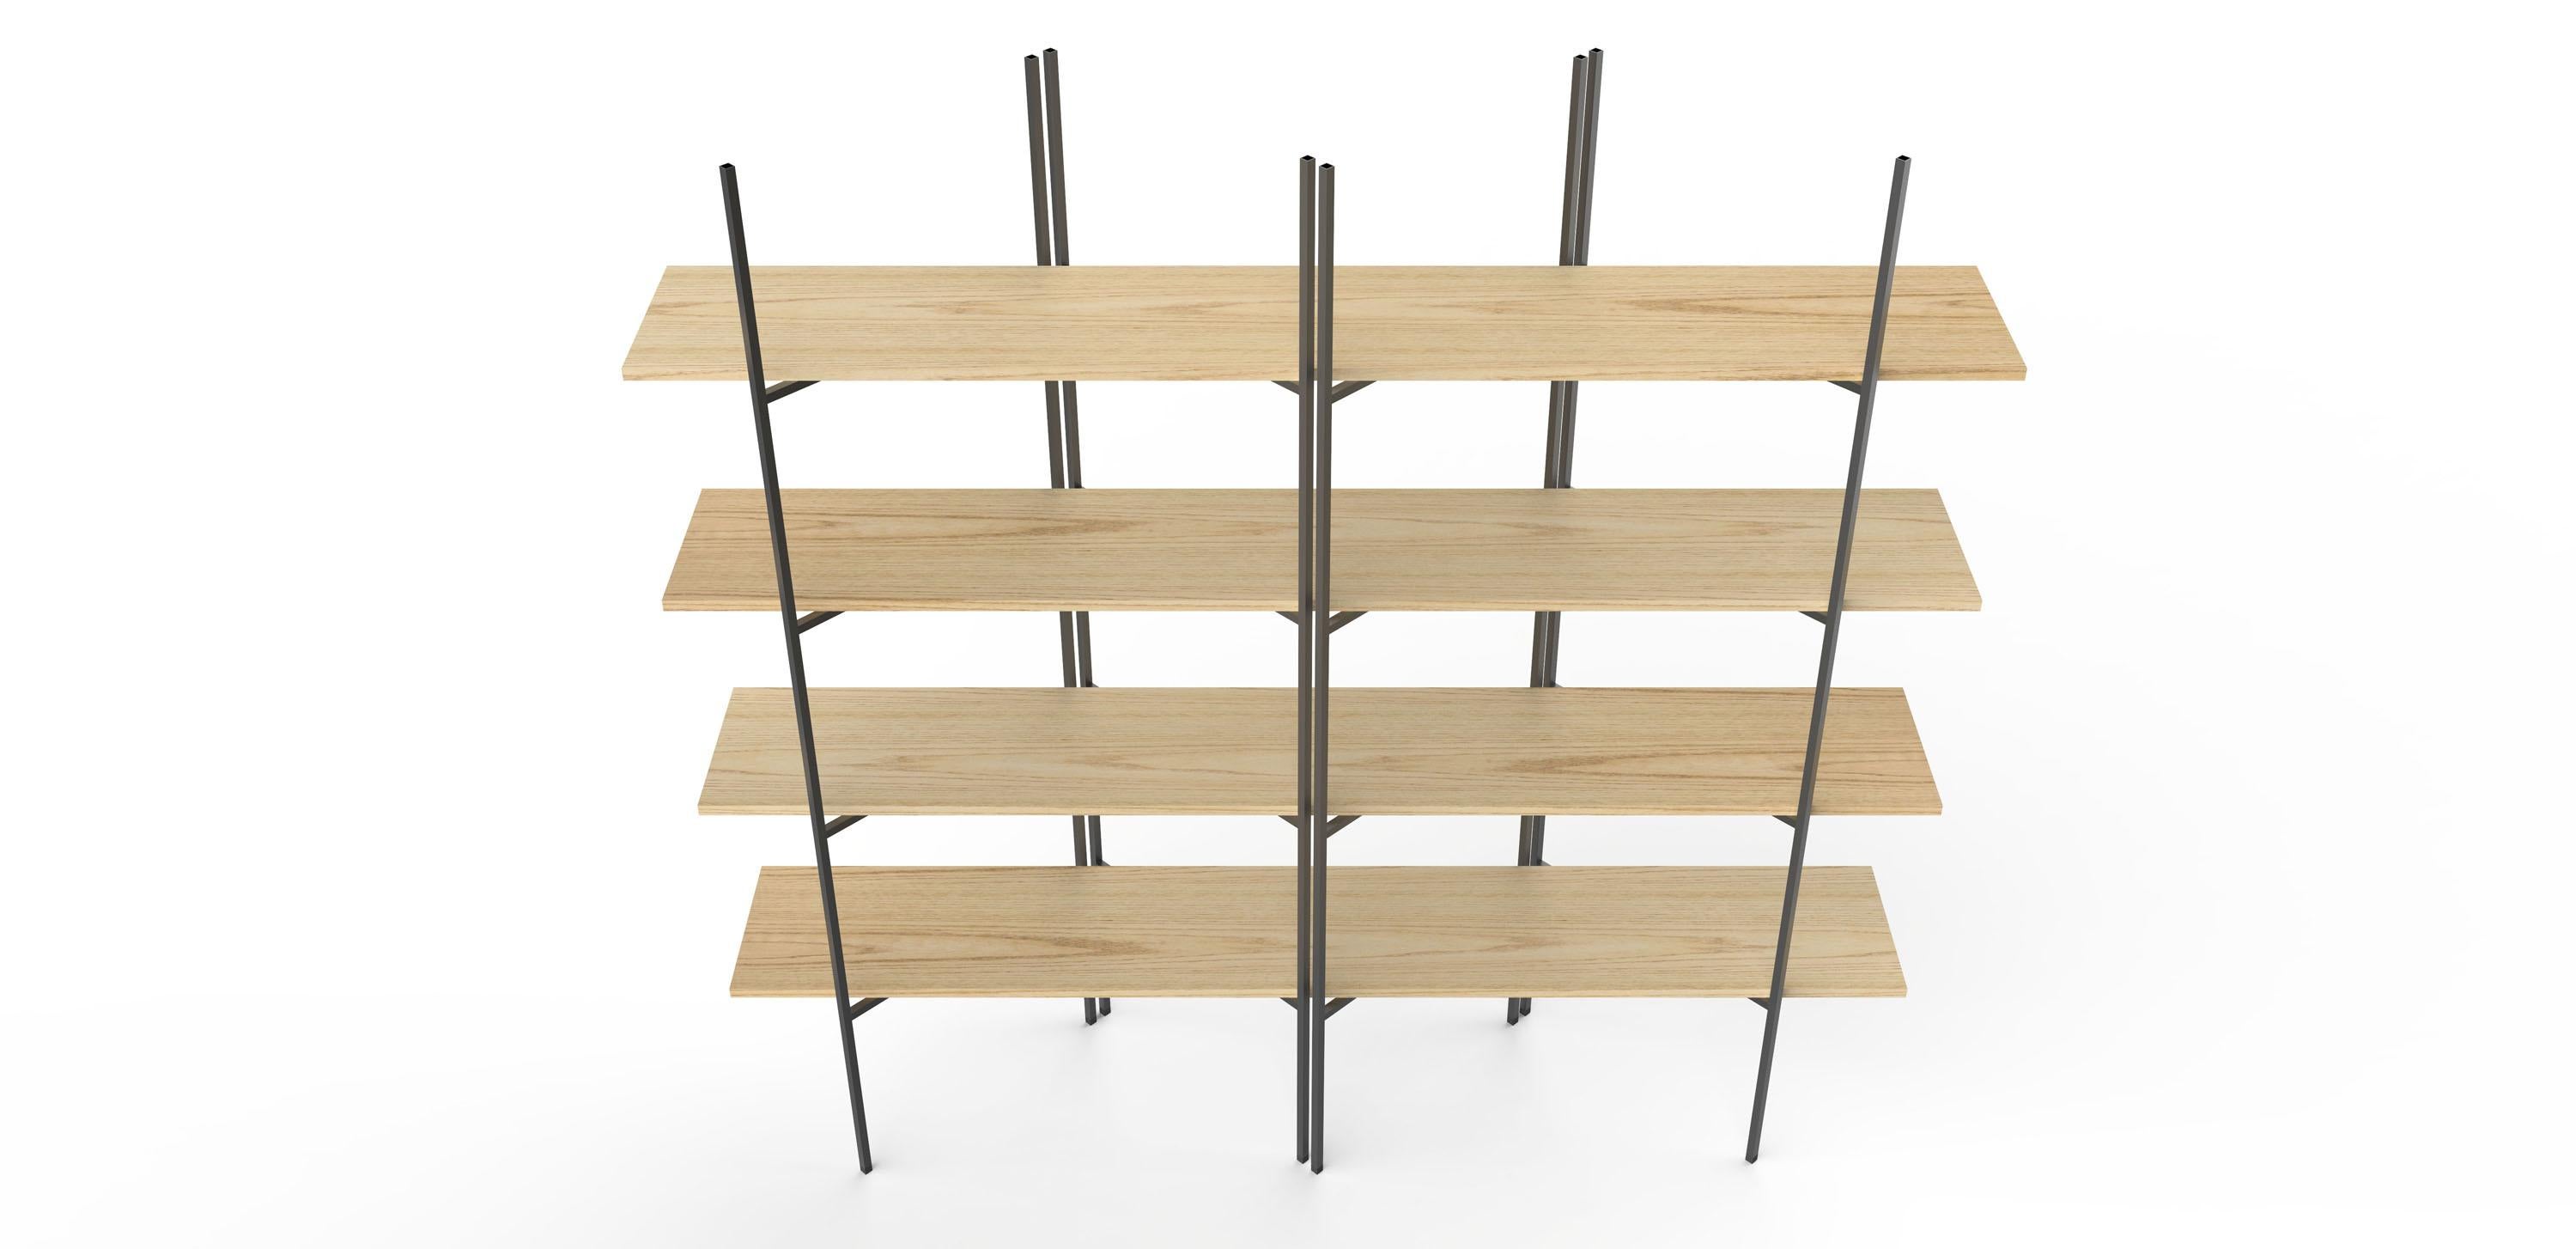 This is a very flexible shelving system that can suit any type of space. With a simple shifting in the assembling of the shelves, a variety of possible configurations is available, different in terms of shape and dimensions: linear, on a corner or